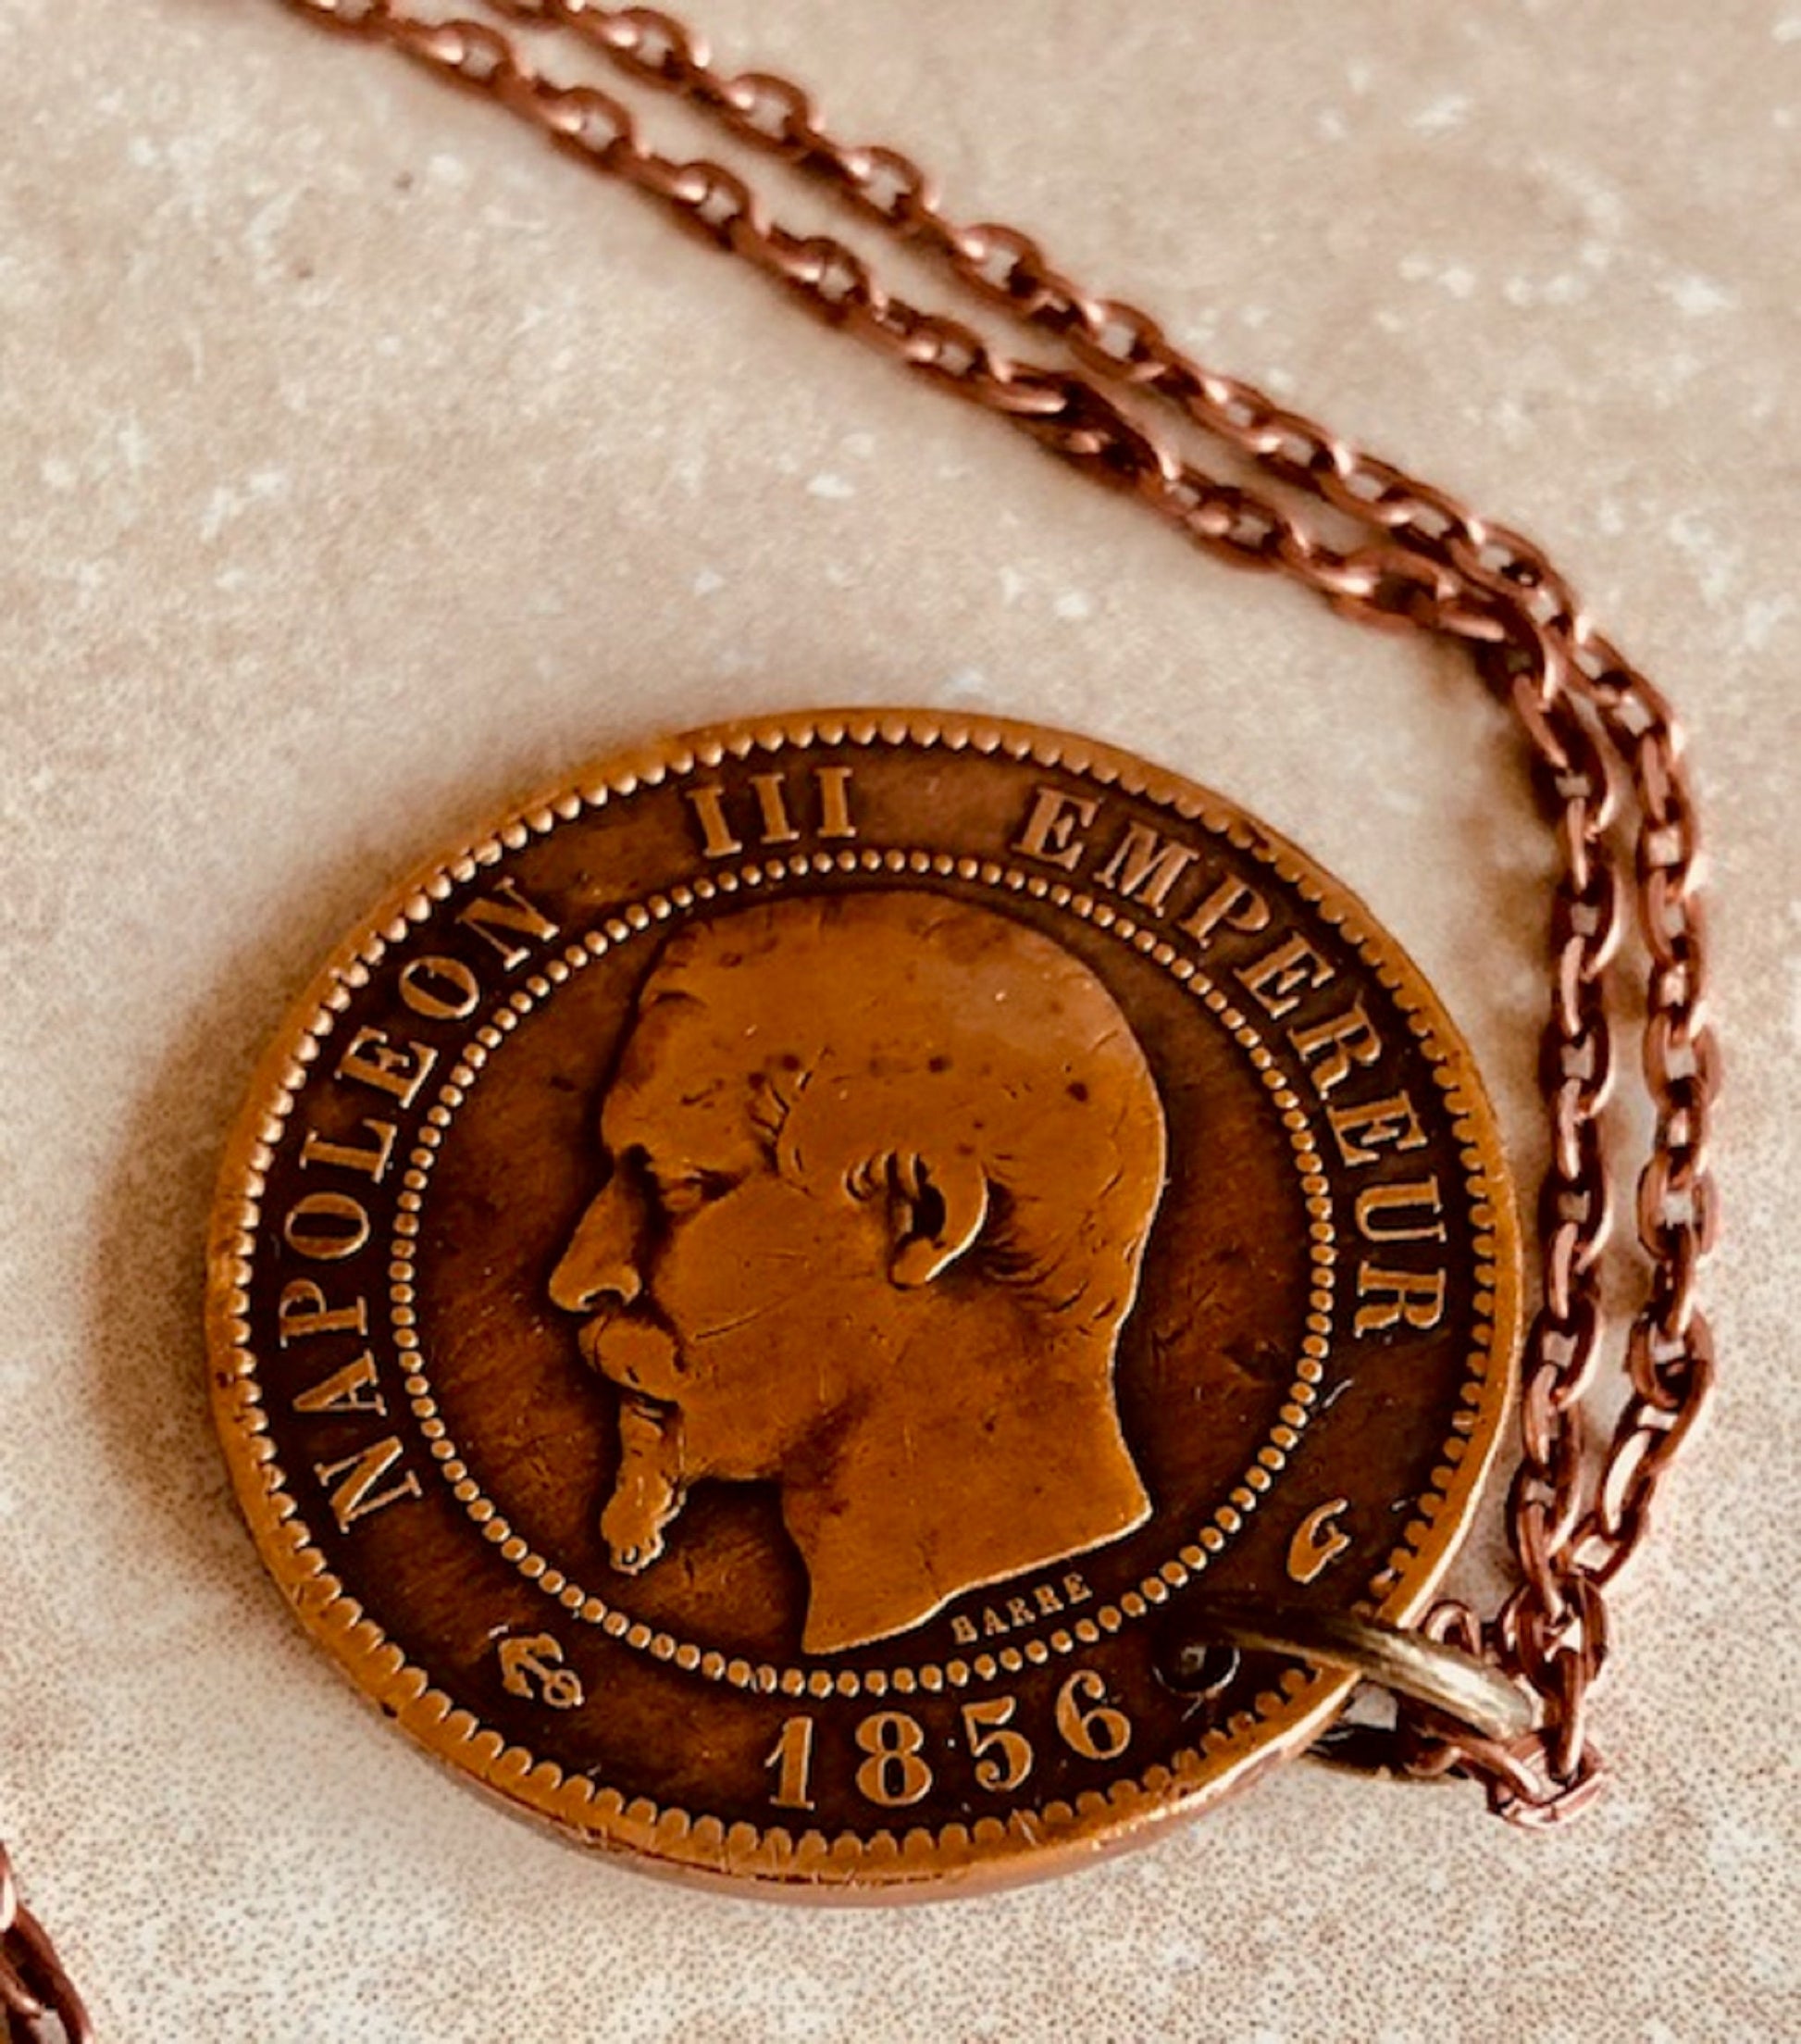 France Coin Necklace French Pendant 10 Dix Centimes Liberty Equality Fraternity Jewelry Gift Friend Charm For Him Her World Coin Collector